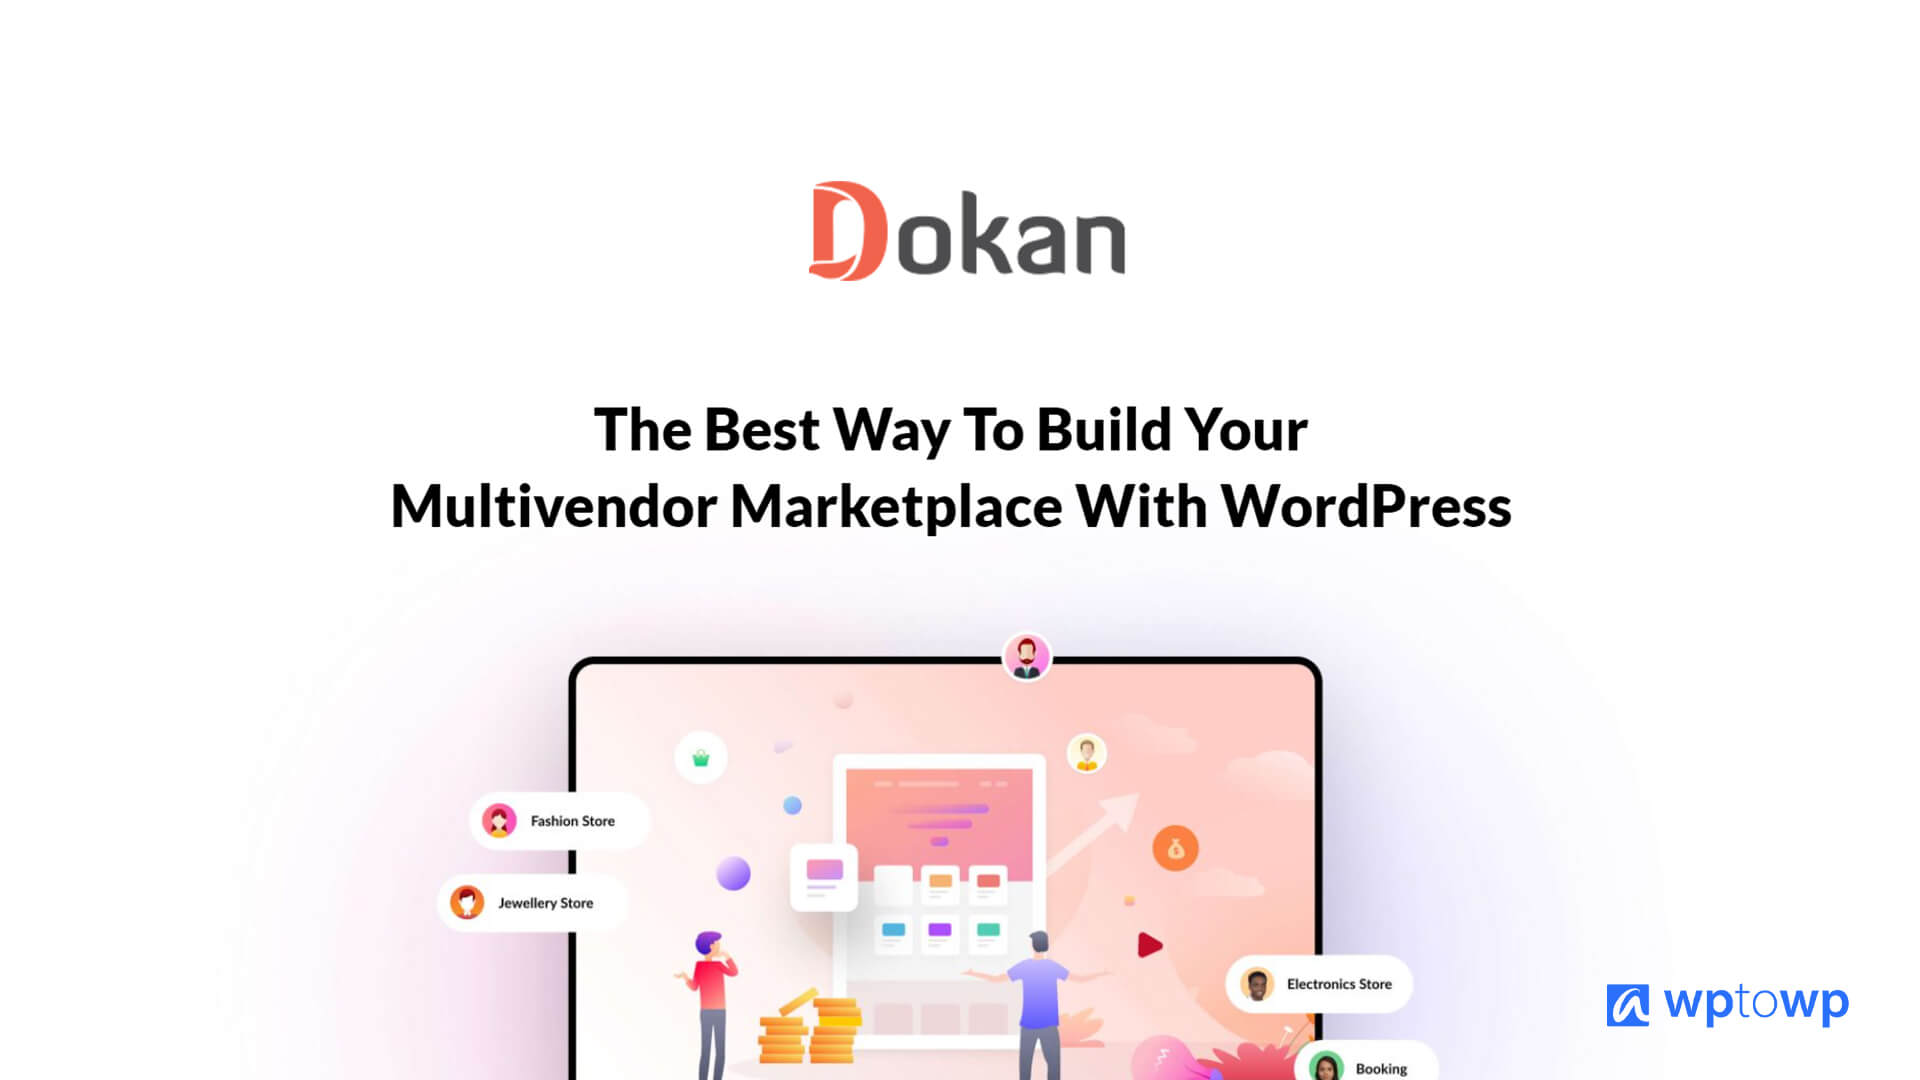 Dokan Multivendor WP review, Wptowp